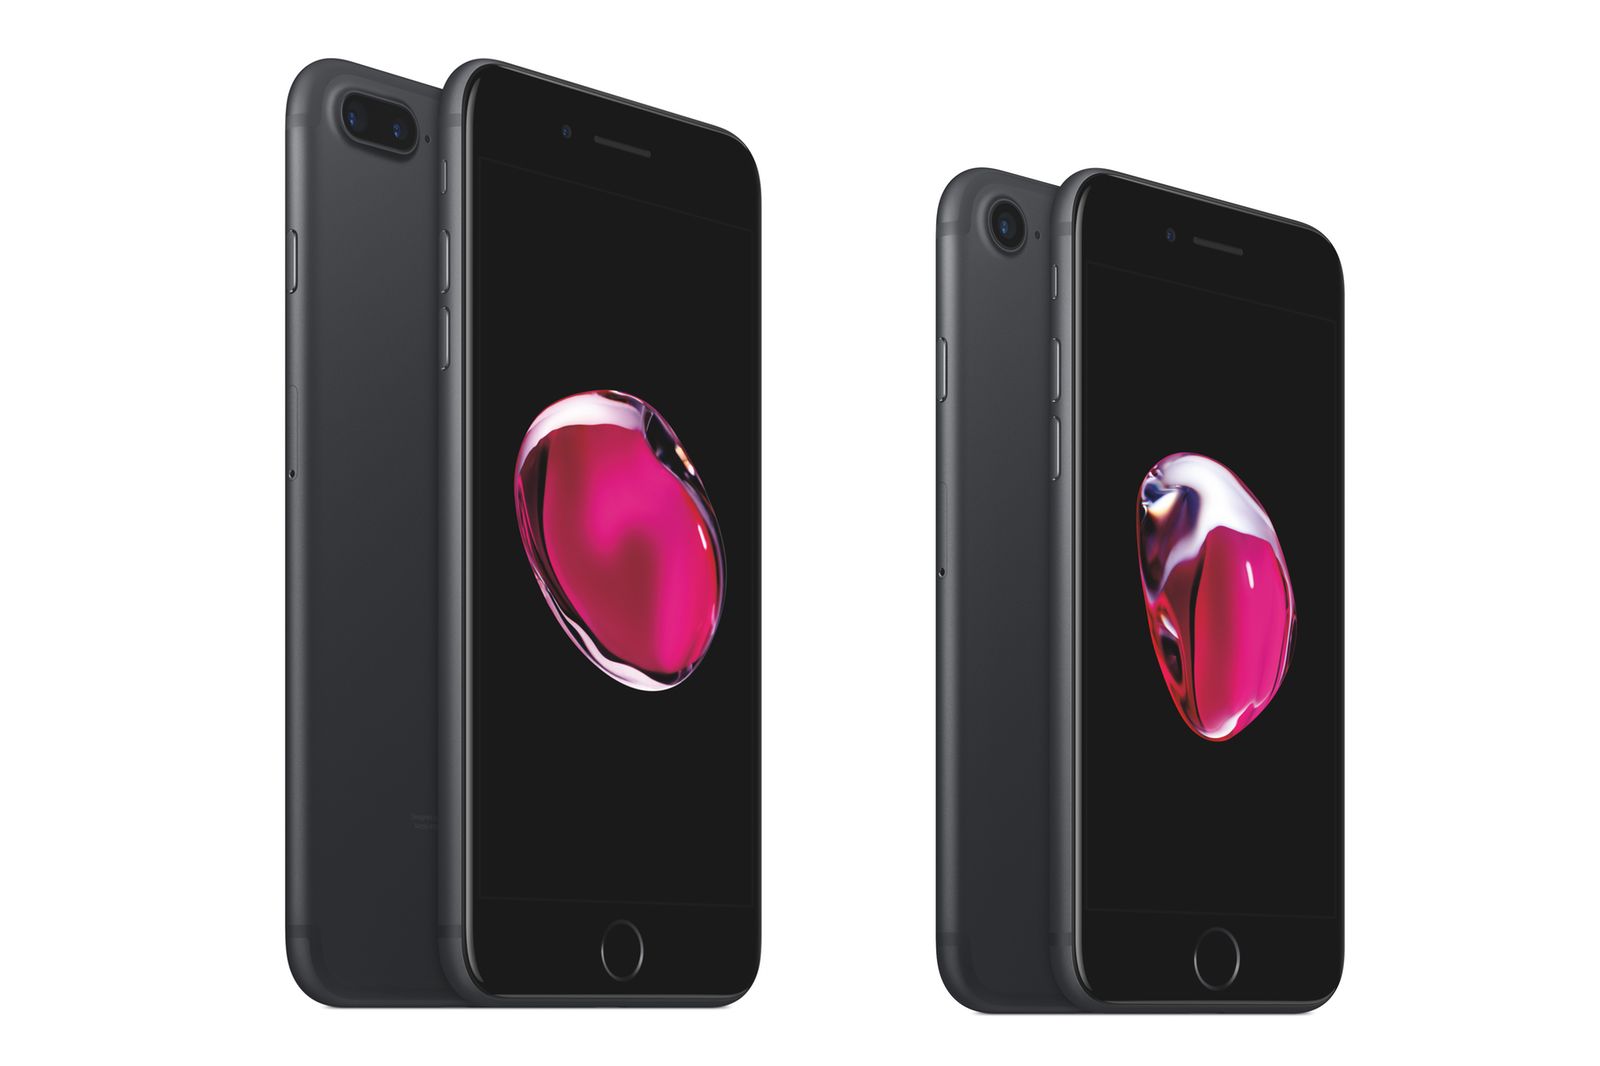 apple iphone 7 and 7 plus are official with waterproofing stereo speakers and new cameras image 6